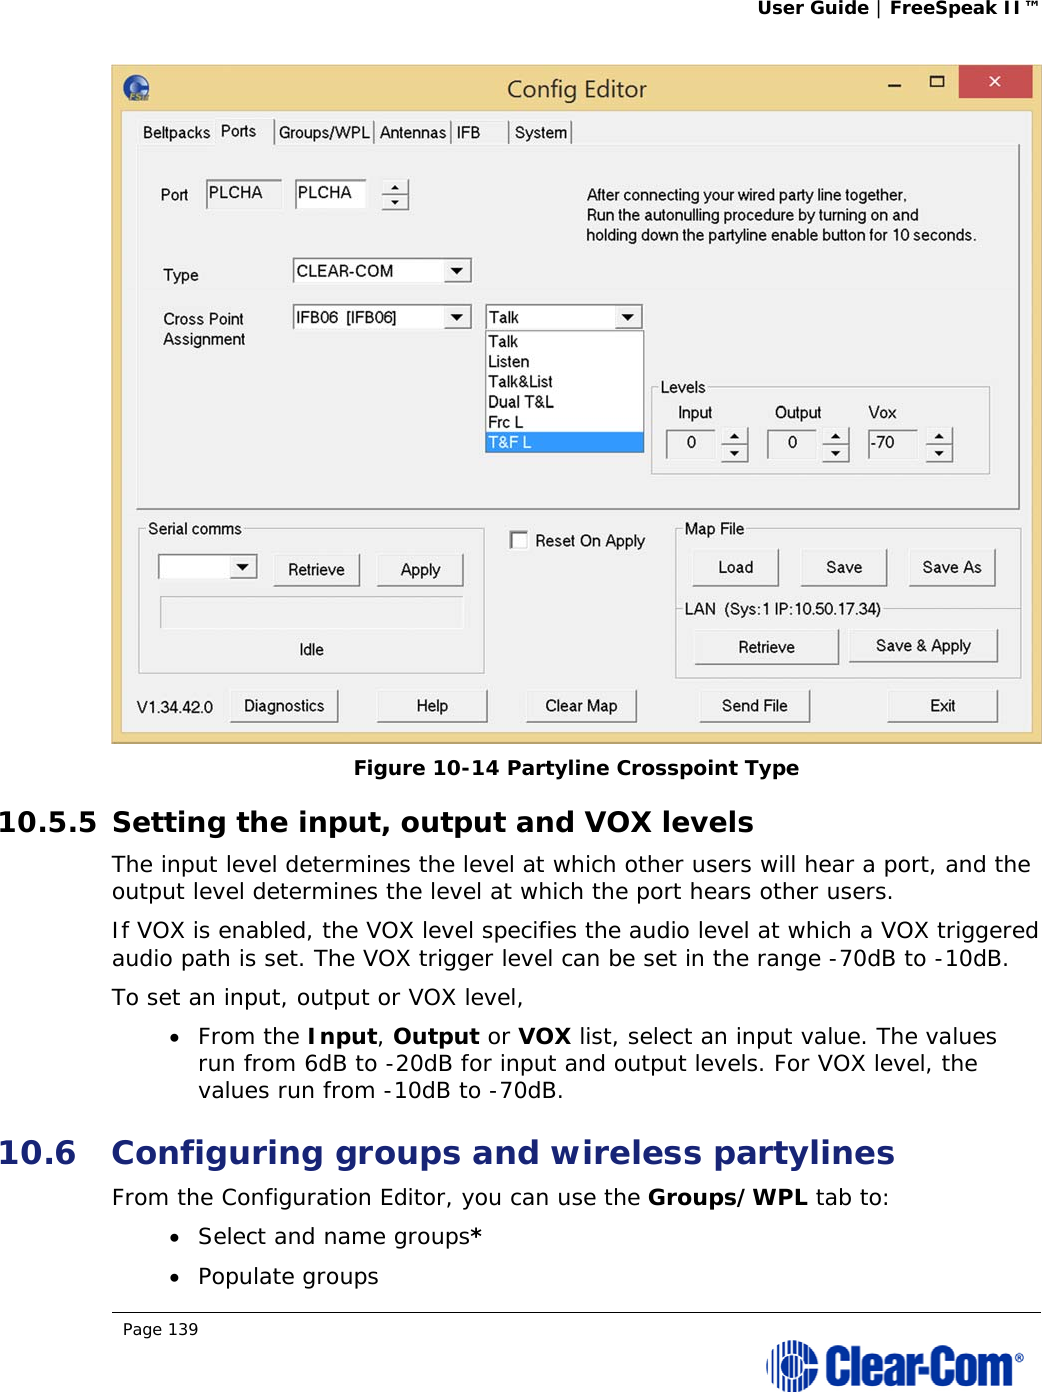 User Guide | FreeSpeak II™  Page 139   Figure 10-14 Partyline Crosspoint Type 10.5.5 Setting the input, output and VOX levels The input level determines the level at which other users will hear a port, and the output level determines the level at which the port hears other users. If VOX is enabled, the VOX level specifies the audio level at which a VOX triggered audio path is set. The VOX trigger level can be set in the range -70dB to -10dB. To set an input, output or VOX level,  From the Input, Output or VOX list, select an input value. The values run from 6dB to -20dB for input and output levels. For VOX level, the values run from -10dB to -70dB. 10.6 Configuring groups and wireless partylines From the Configuration Editor, you can use the Groups/WPL tab to:  Select and name groups*  Populate groups 